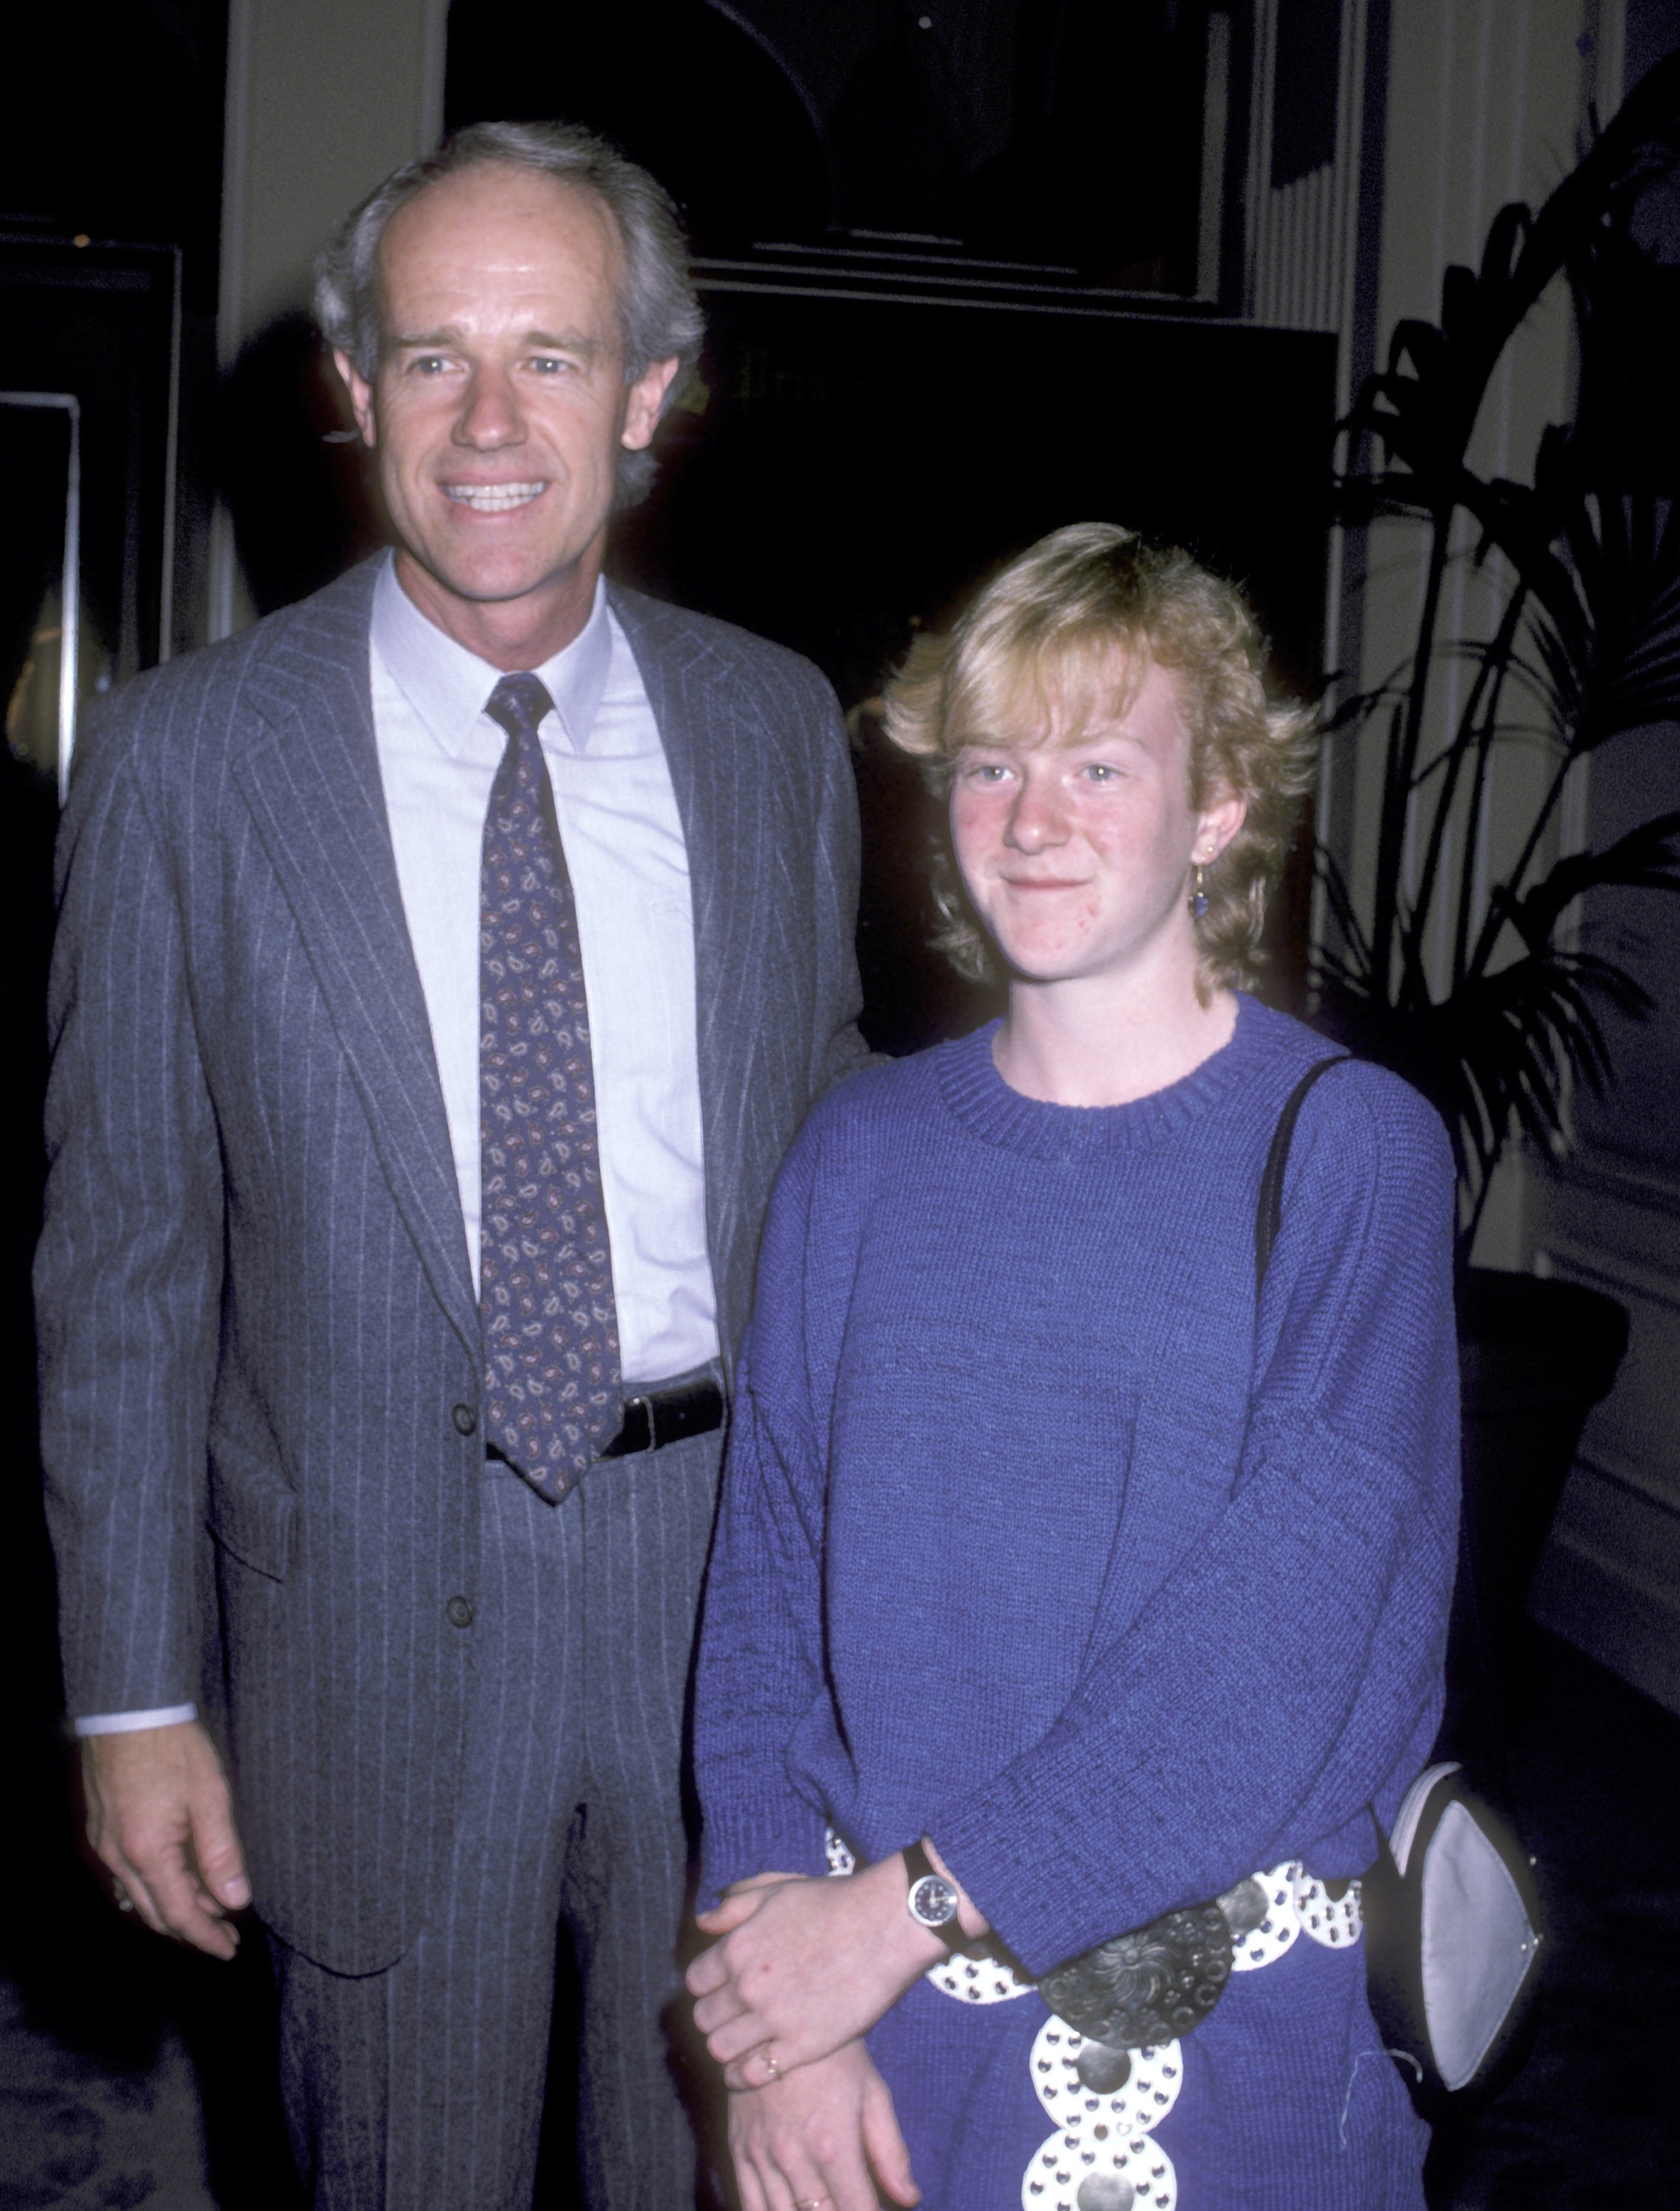 Actor Mike Farrell and his daughter Erin Farrell attend the '25th Anniversary Celebration of Amnesty International' at Beverly Hilton Hotel on September 15, 1986 in Beverly Hills, California ┃Source: Getty Images